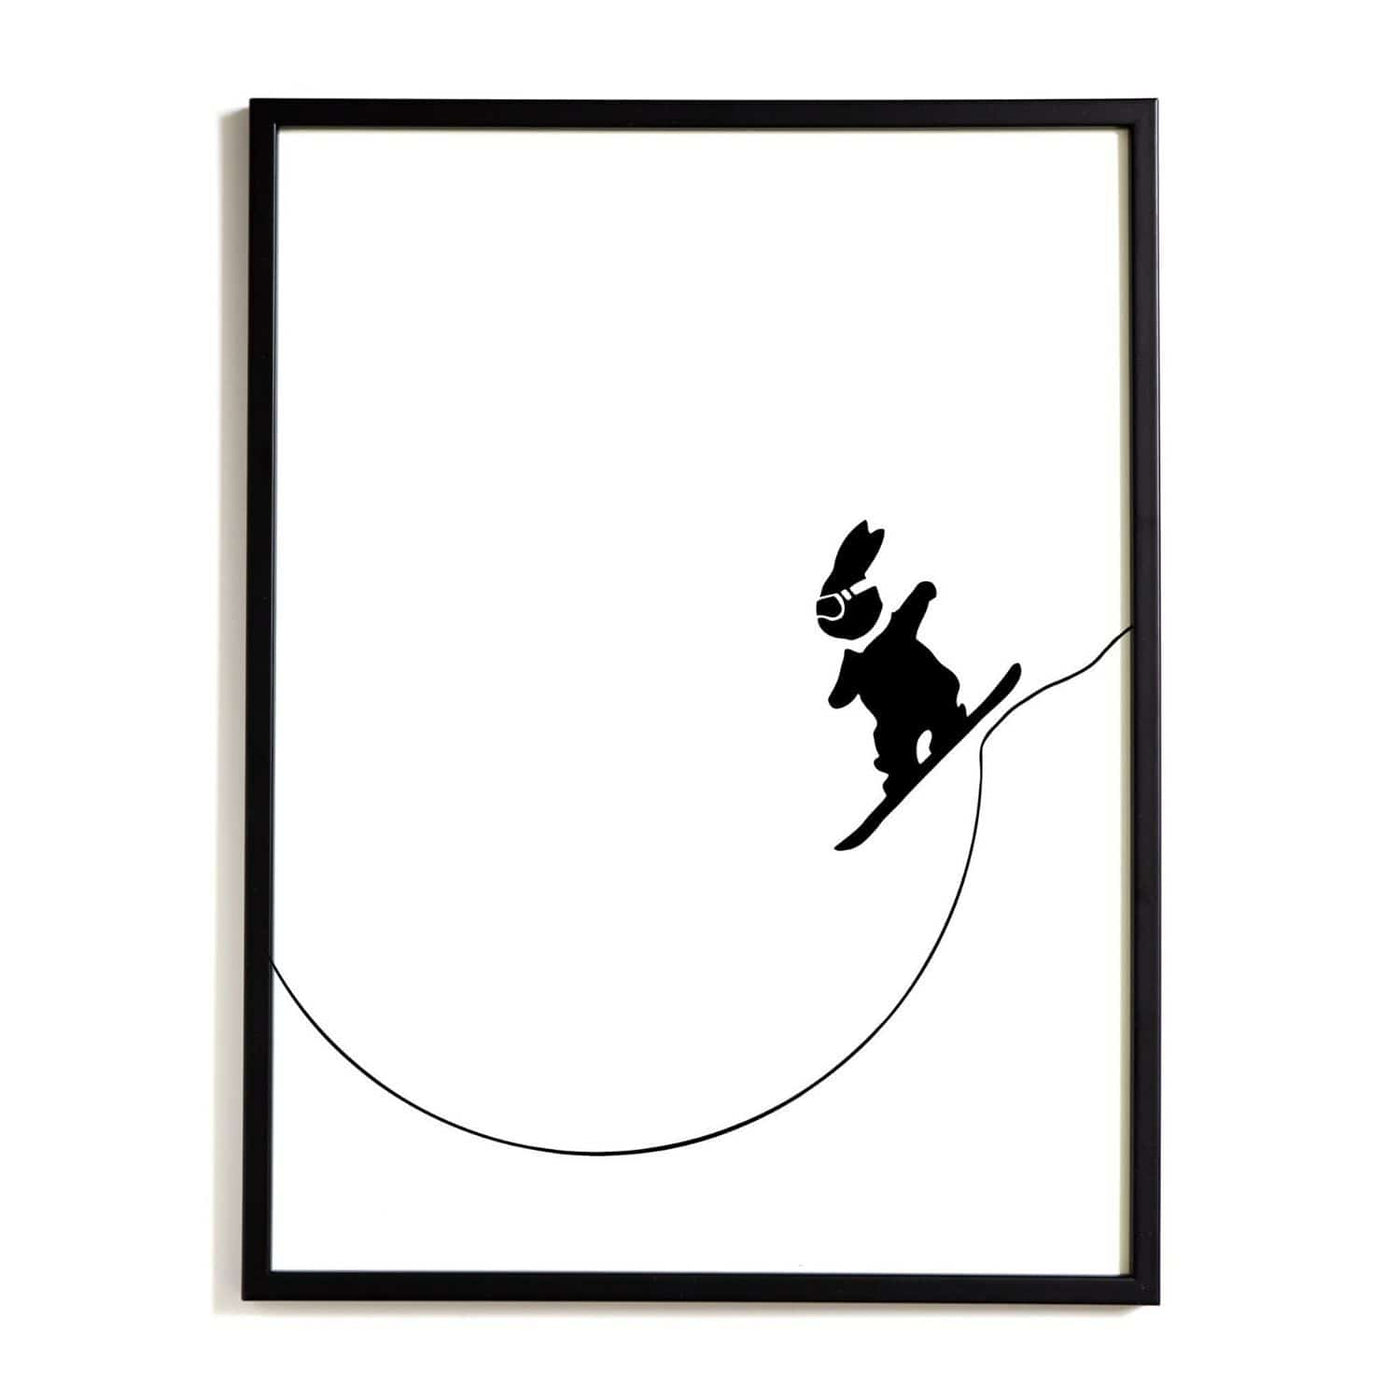 black and white image of HAM rabbit snowboarding into a half pipe. Scarf blowing in the wind. Fun and playful series of prints. Ideal for adults and children.